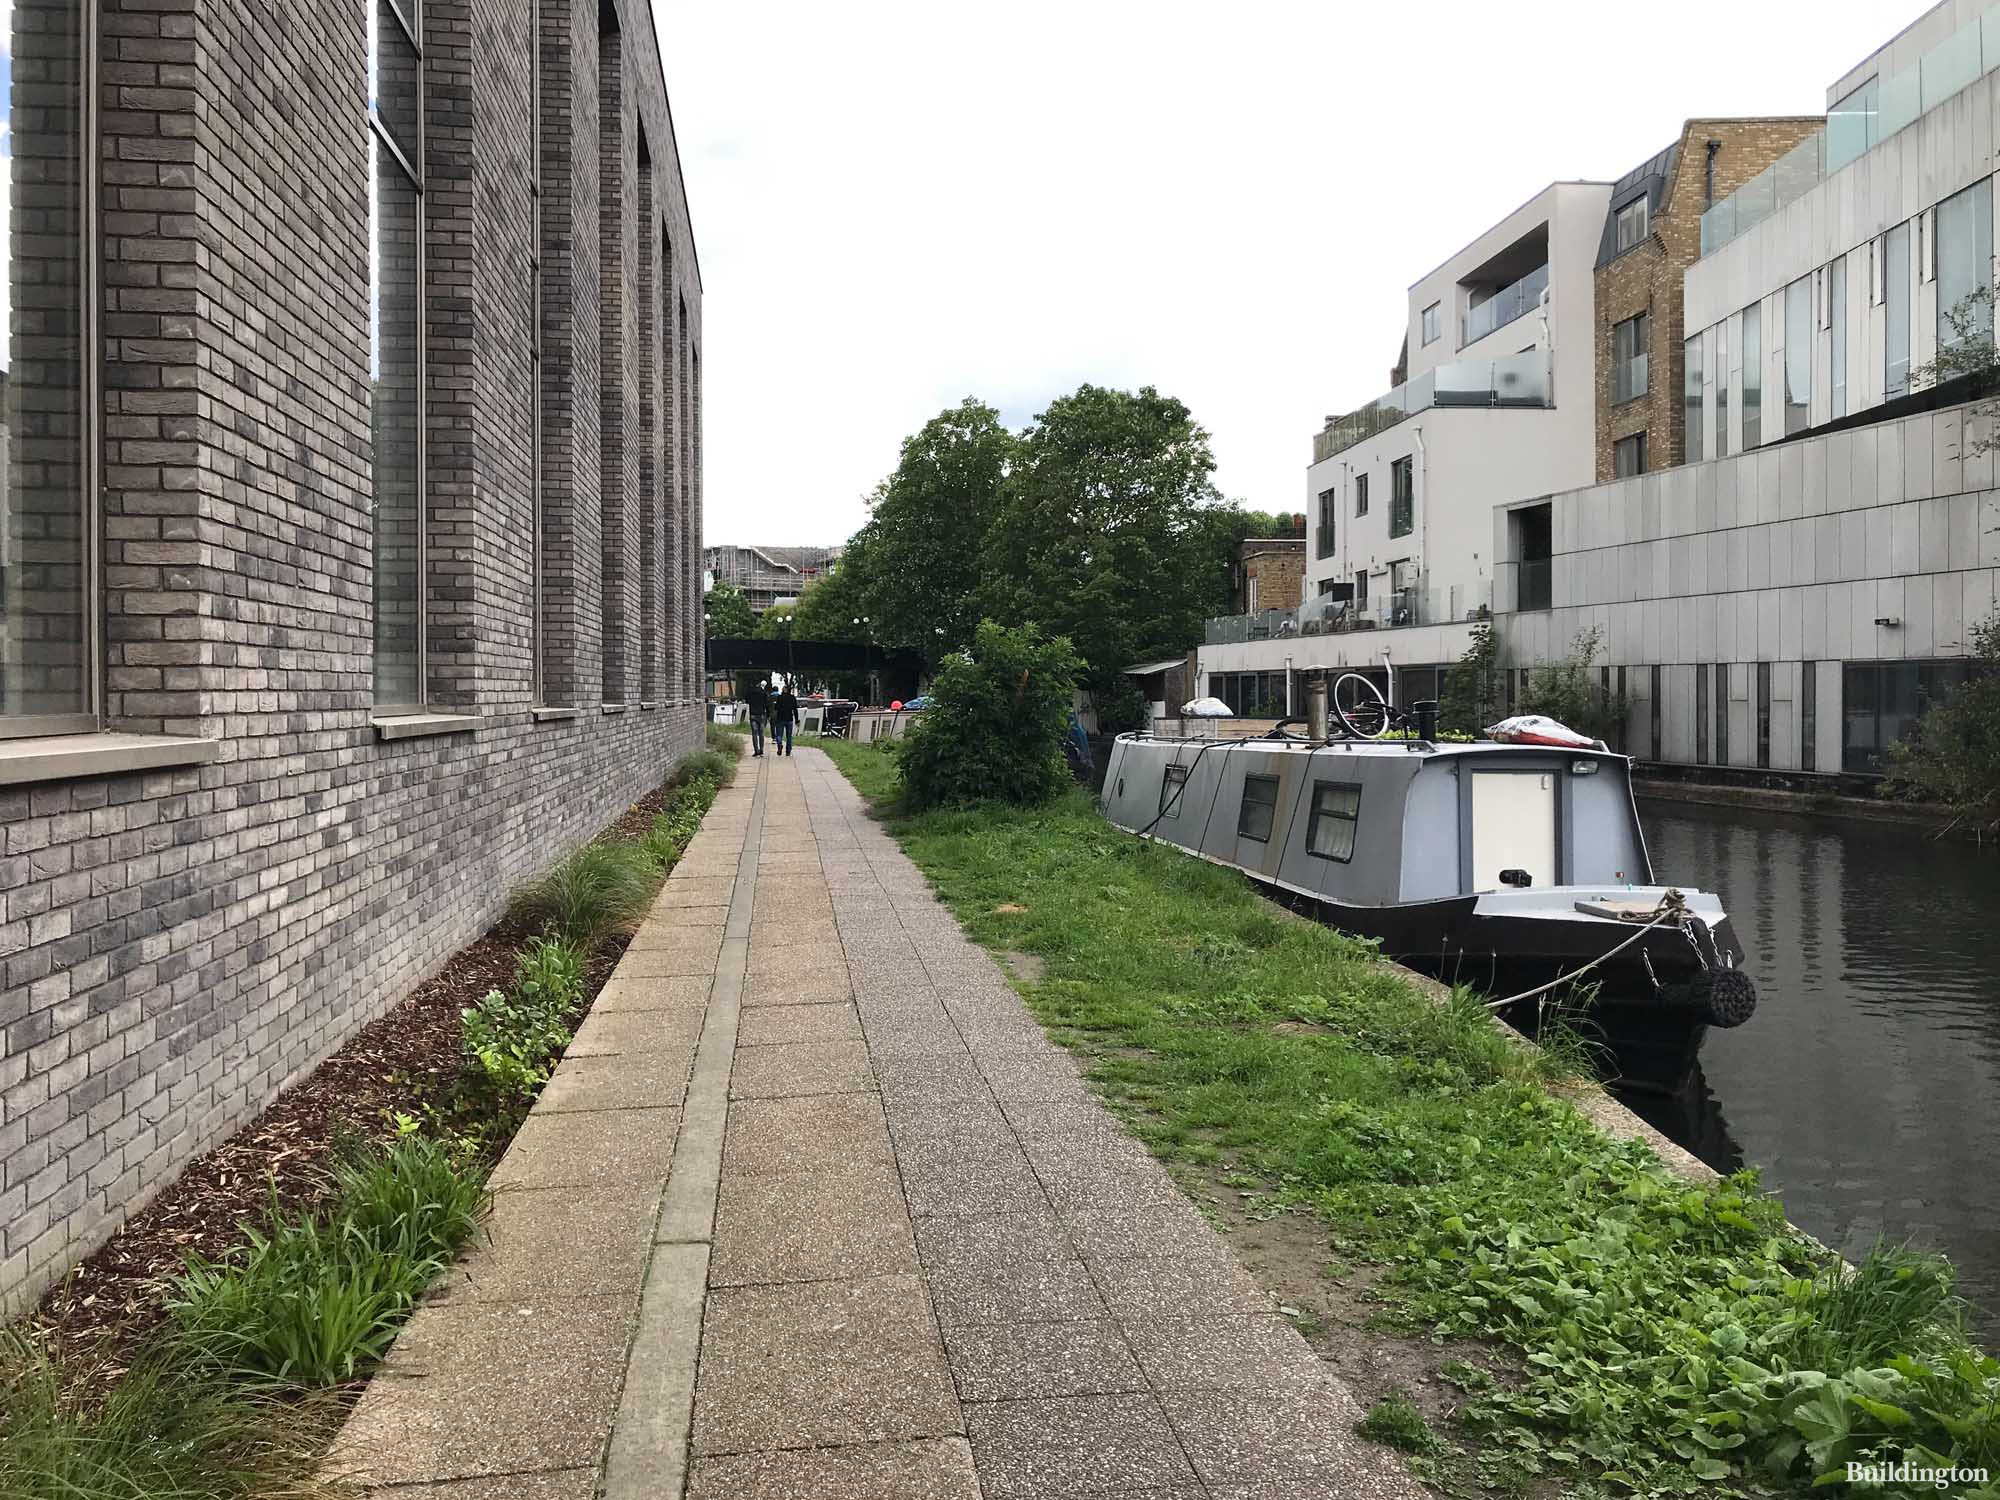 The Gramophone Works by the Grand Union Canal in London W10